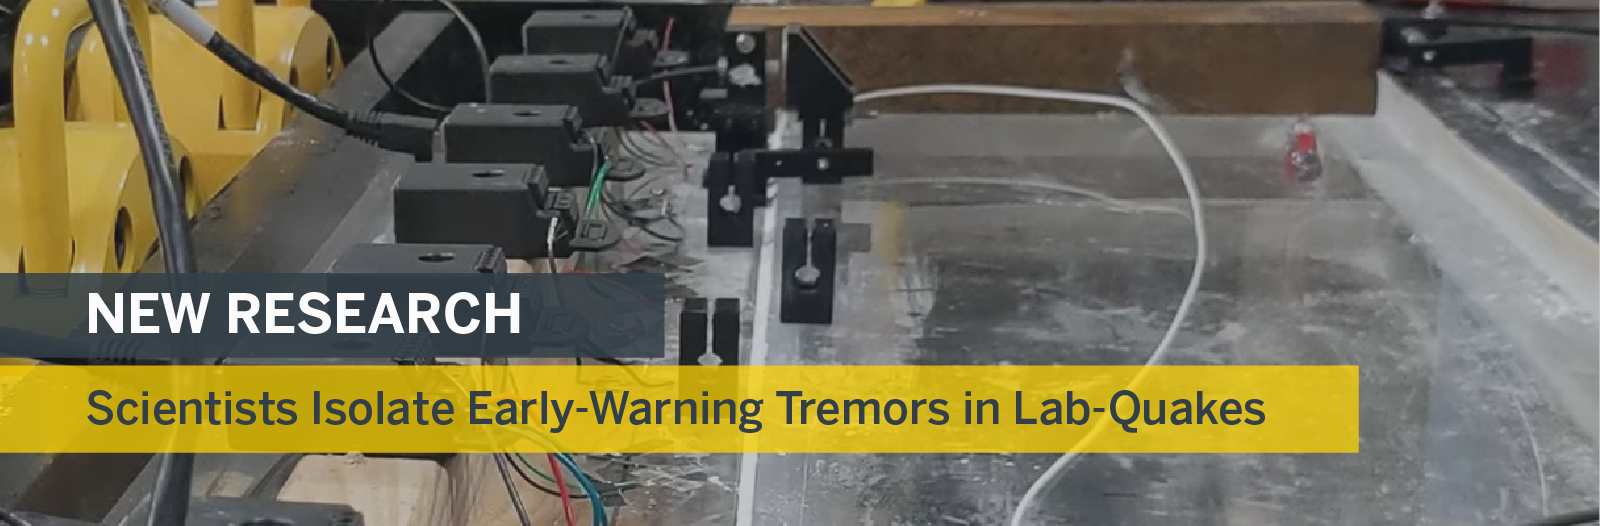 Scientists Isolate Early-Warning Tremor Pattern in Lab-Made Earthquakes – Banner